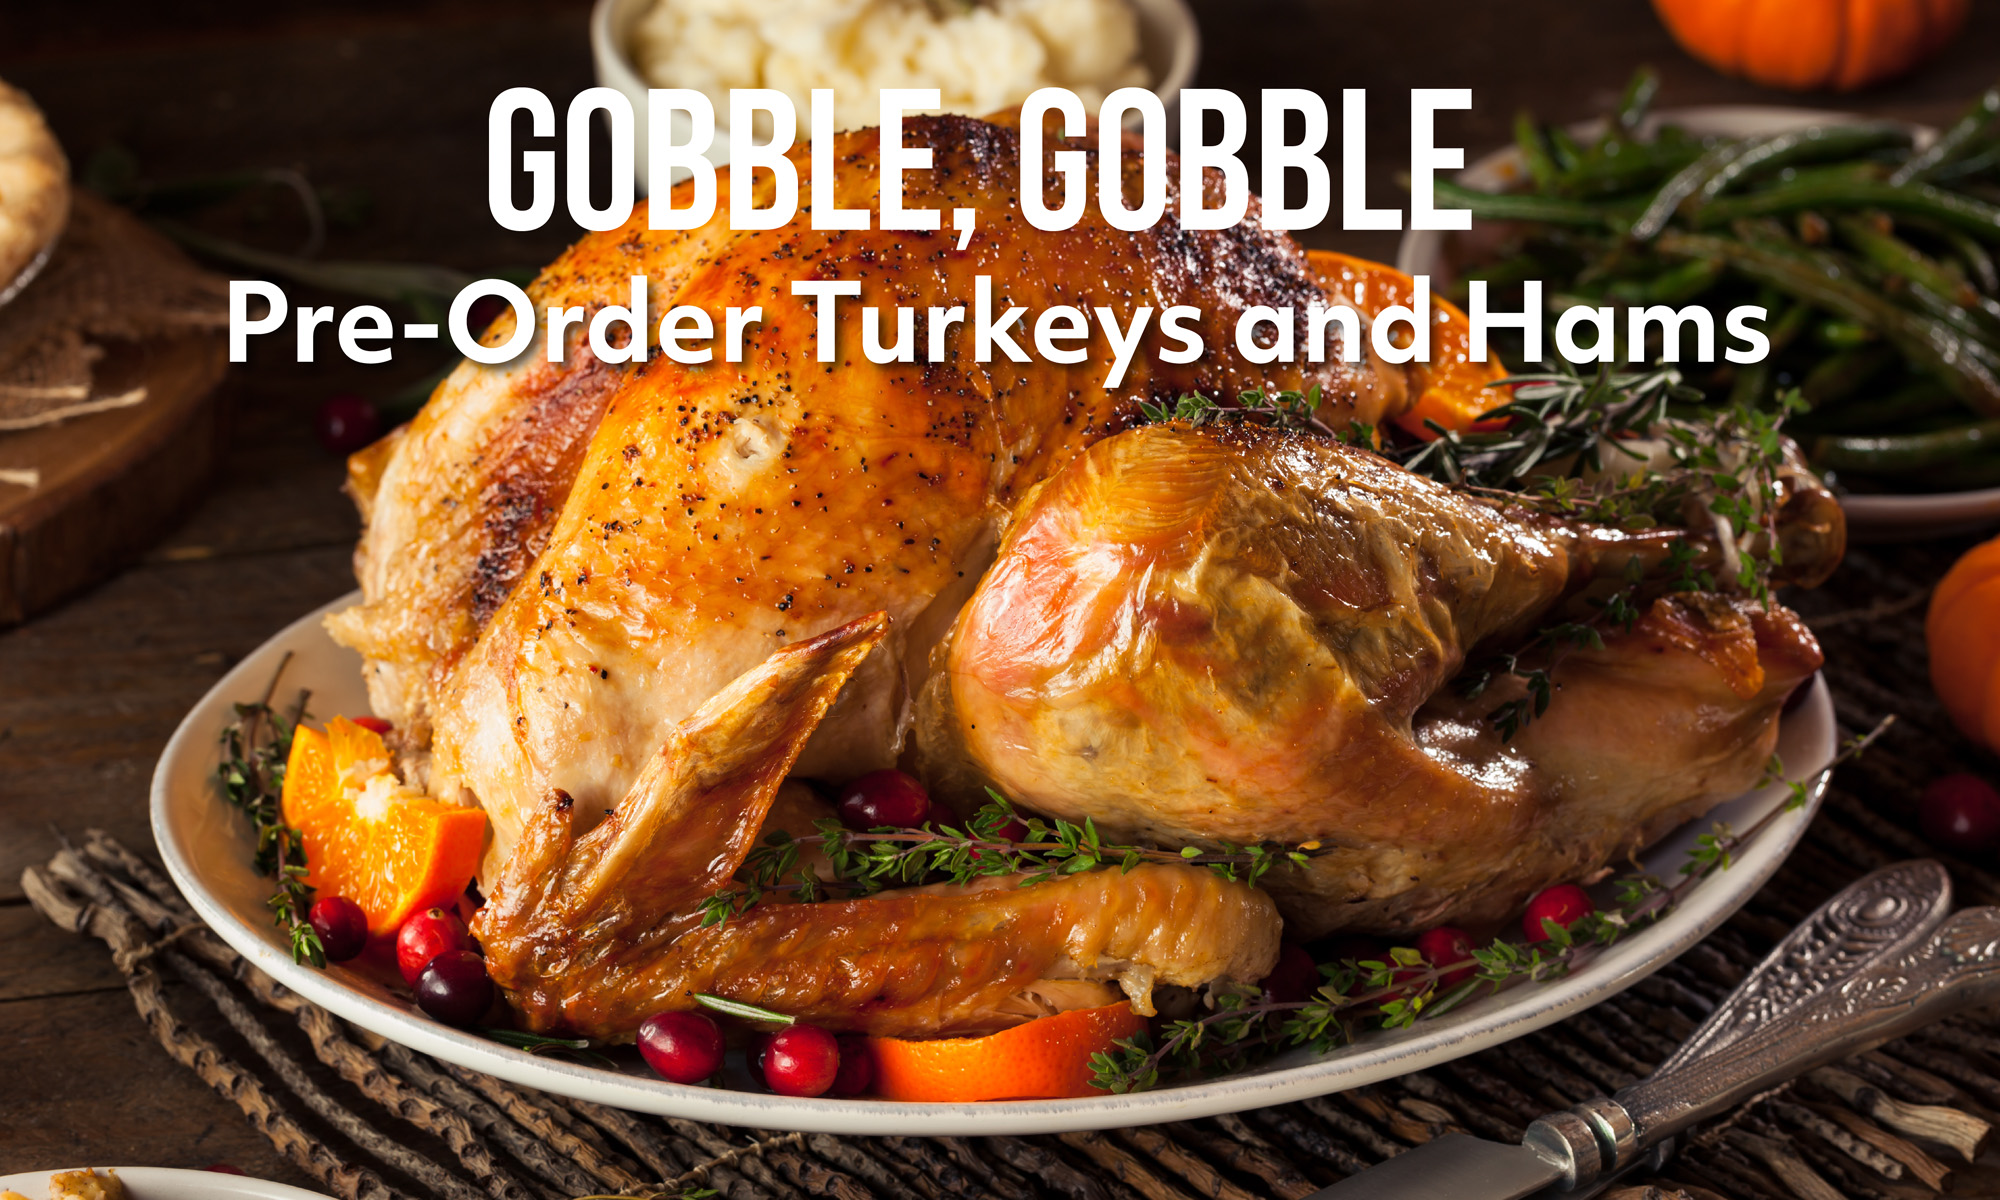 Pre-Order your Thanksgiving Turkeys and Hams Pre-Order your Thanksgiving Turkeys and Hams. Local BC and Island Raised Turkeys, Red Barn Smokehouse Handcrafted hams and customized turkey roasts.